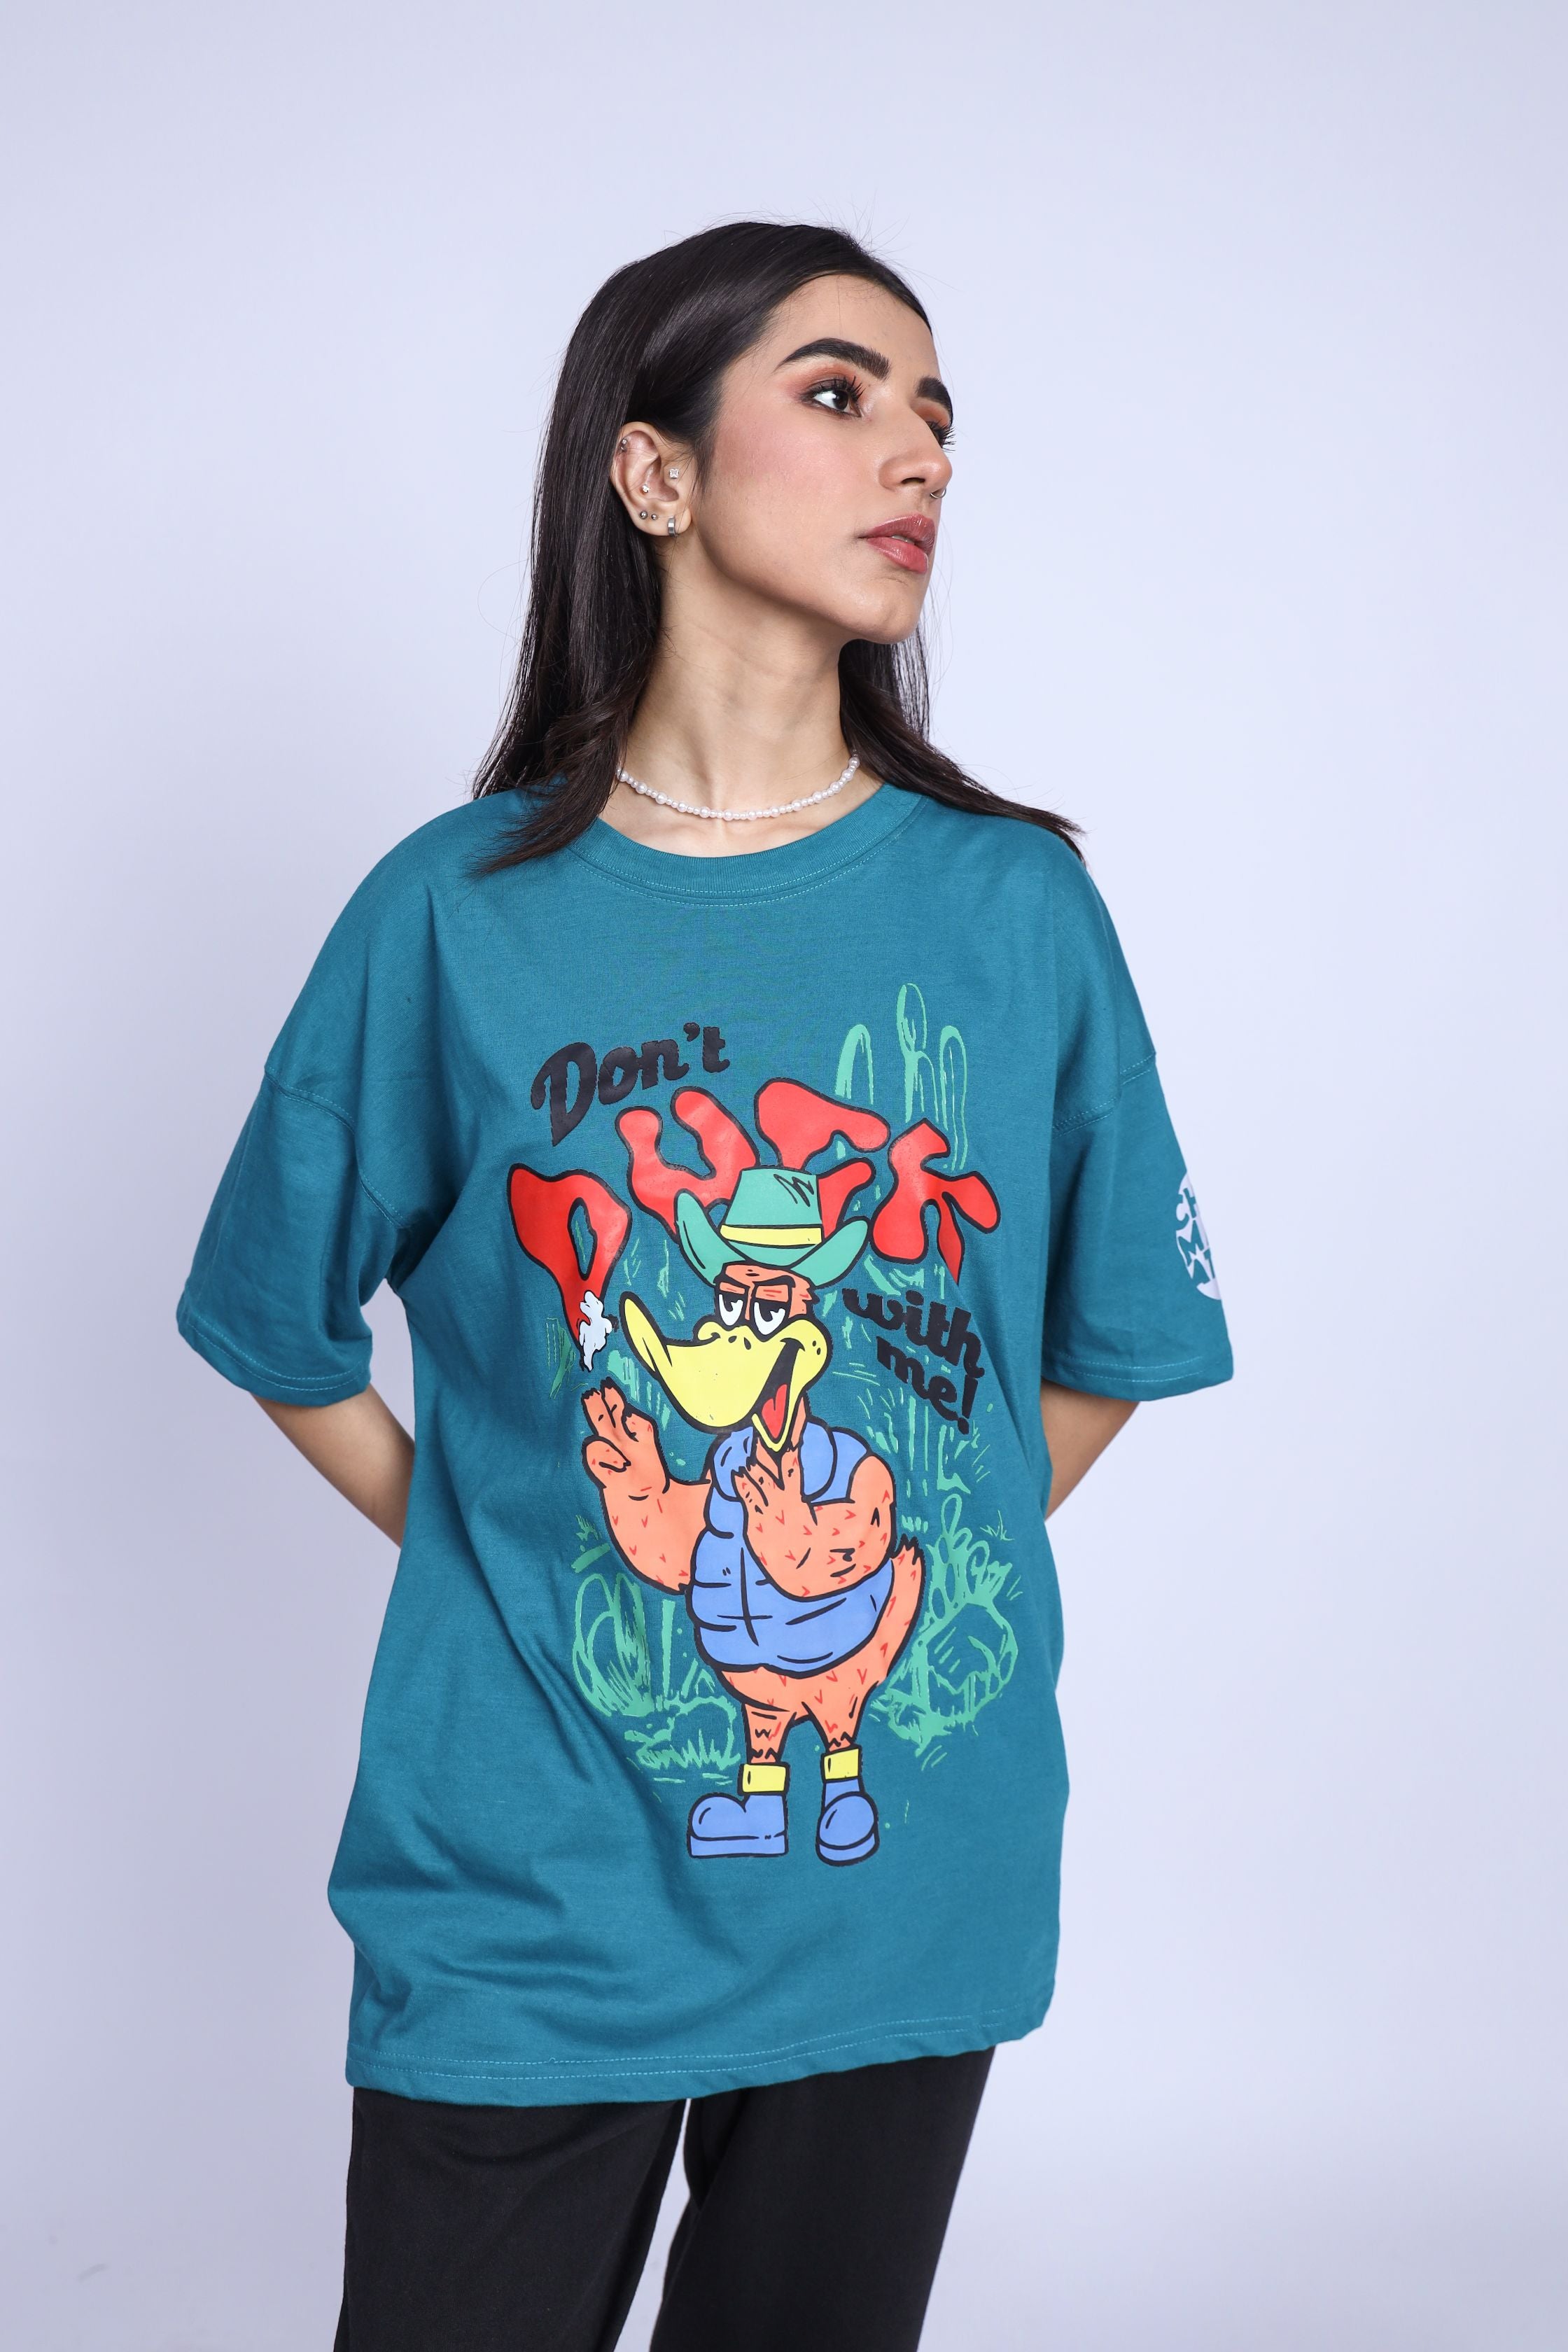 DON’T DUCK OVERSIZED T-SHIRT - Shop Now - Checkmate Atelier